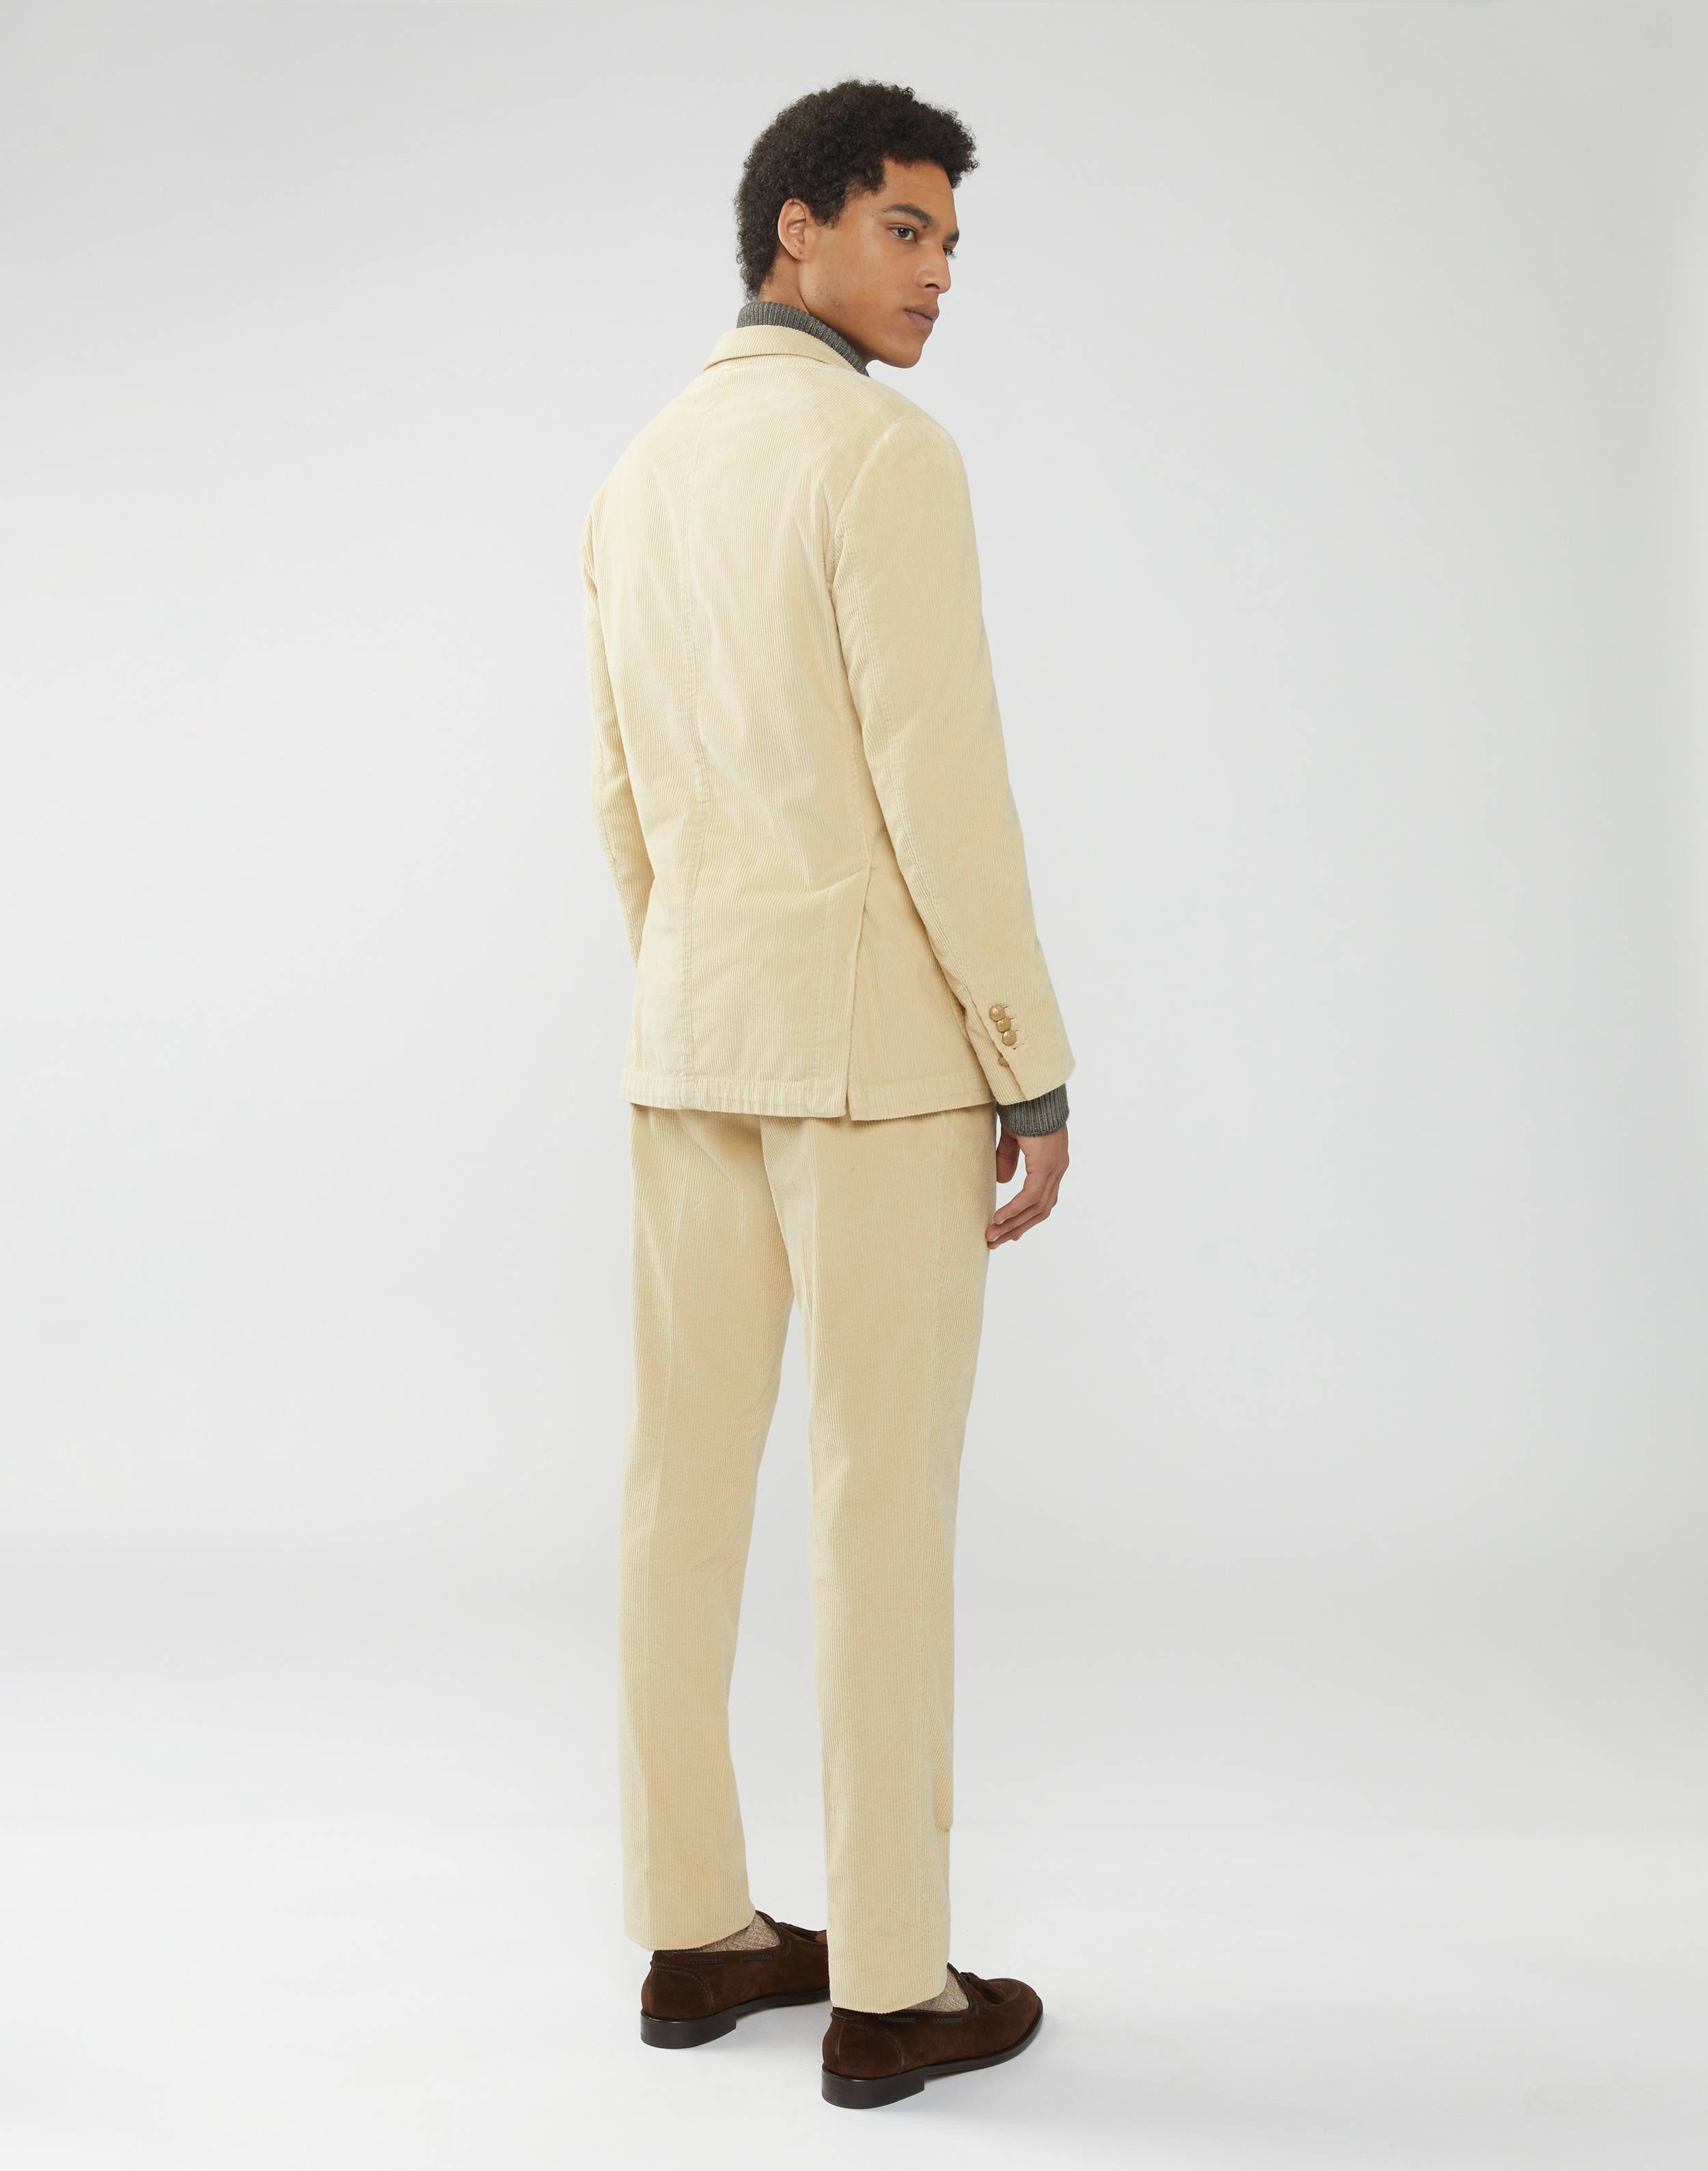 Suit in cream-coloured stretch corduroy - Supersoft